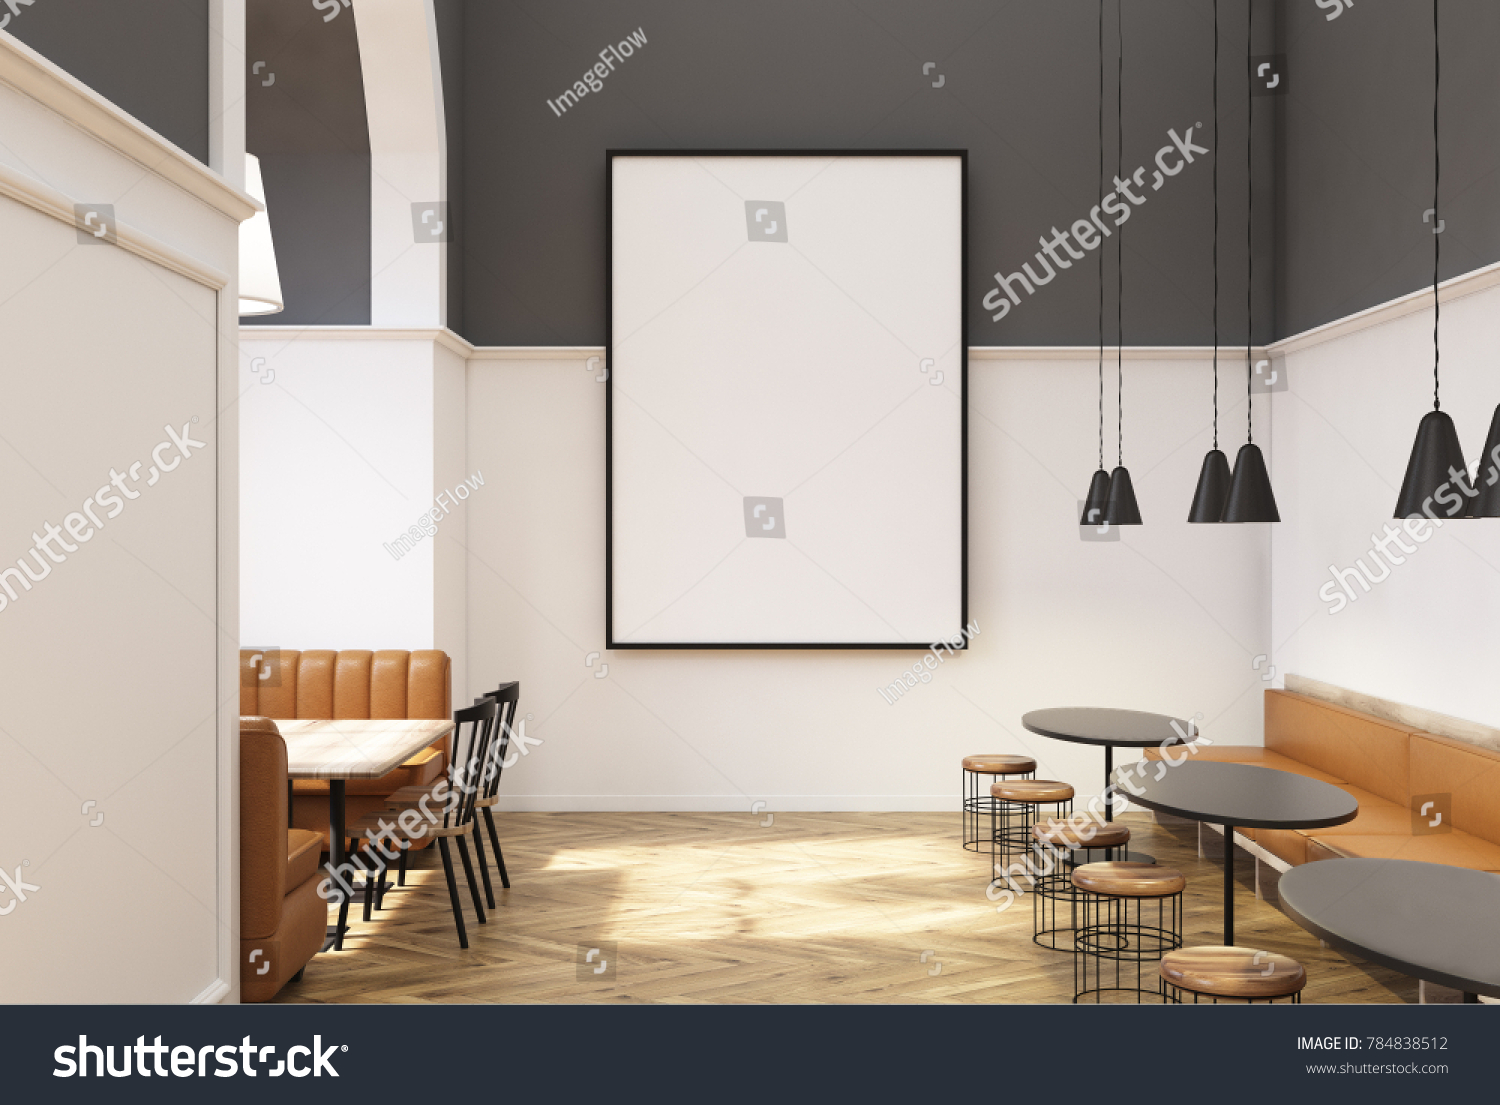 White and gray restaurant interior with brown sofas standing near rectangular and round wooden tables, and a vertical poster. 3d rendering mock up #784838512